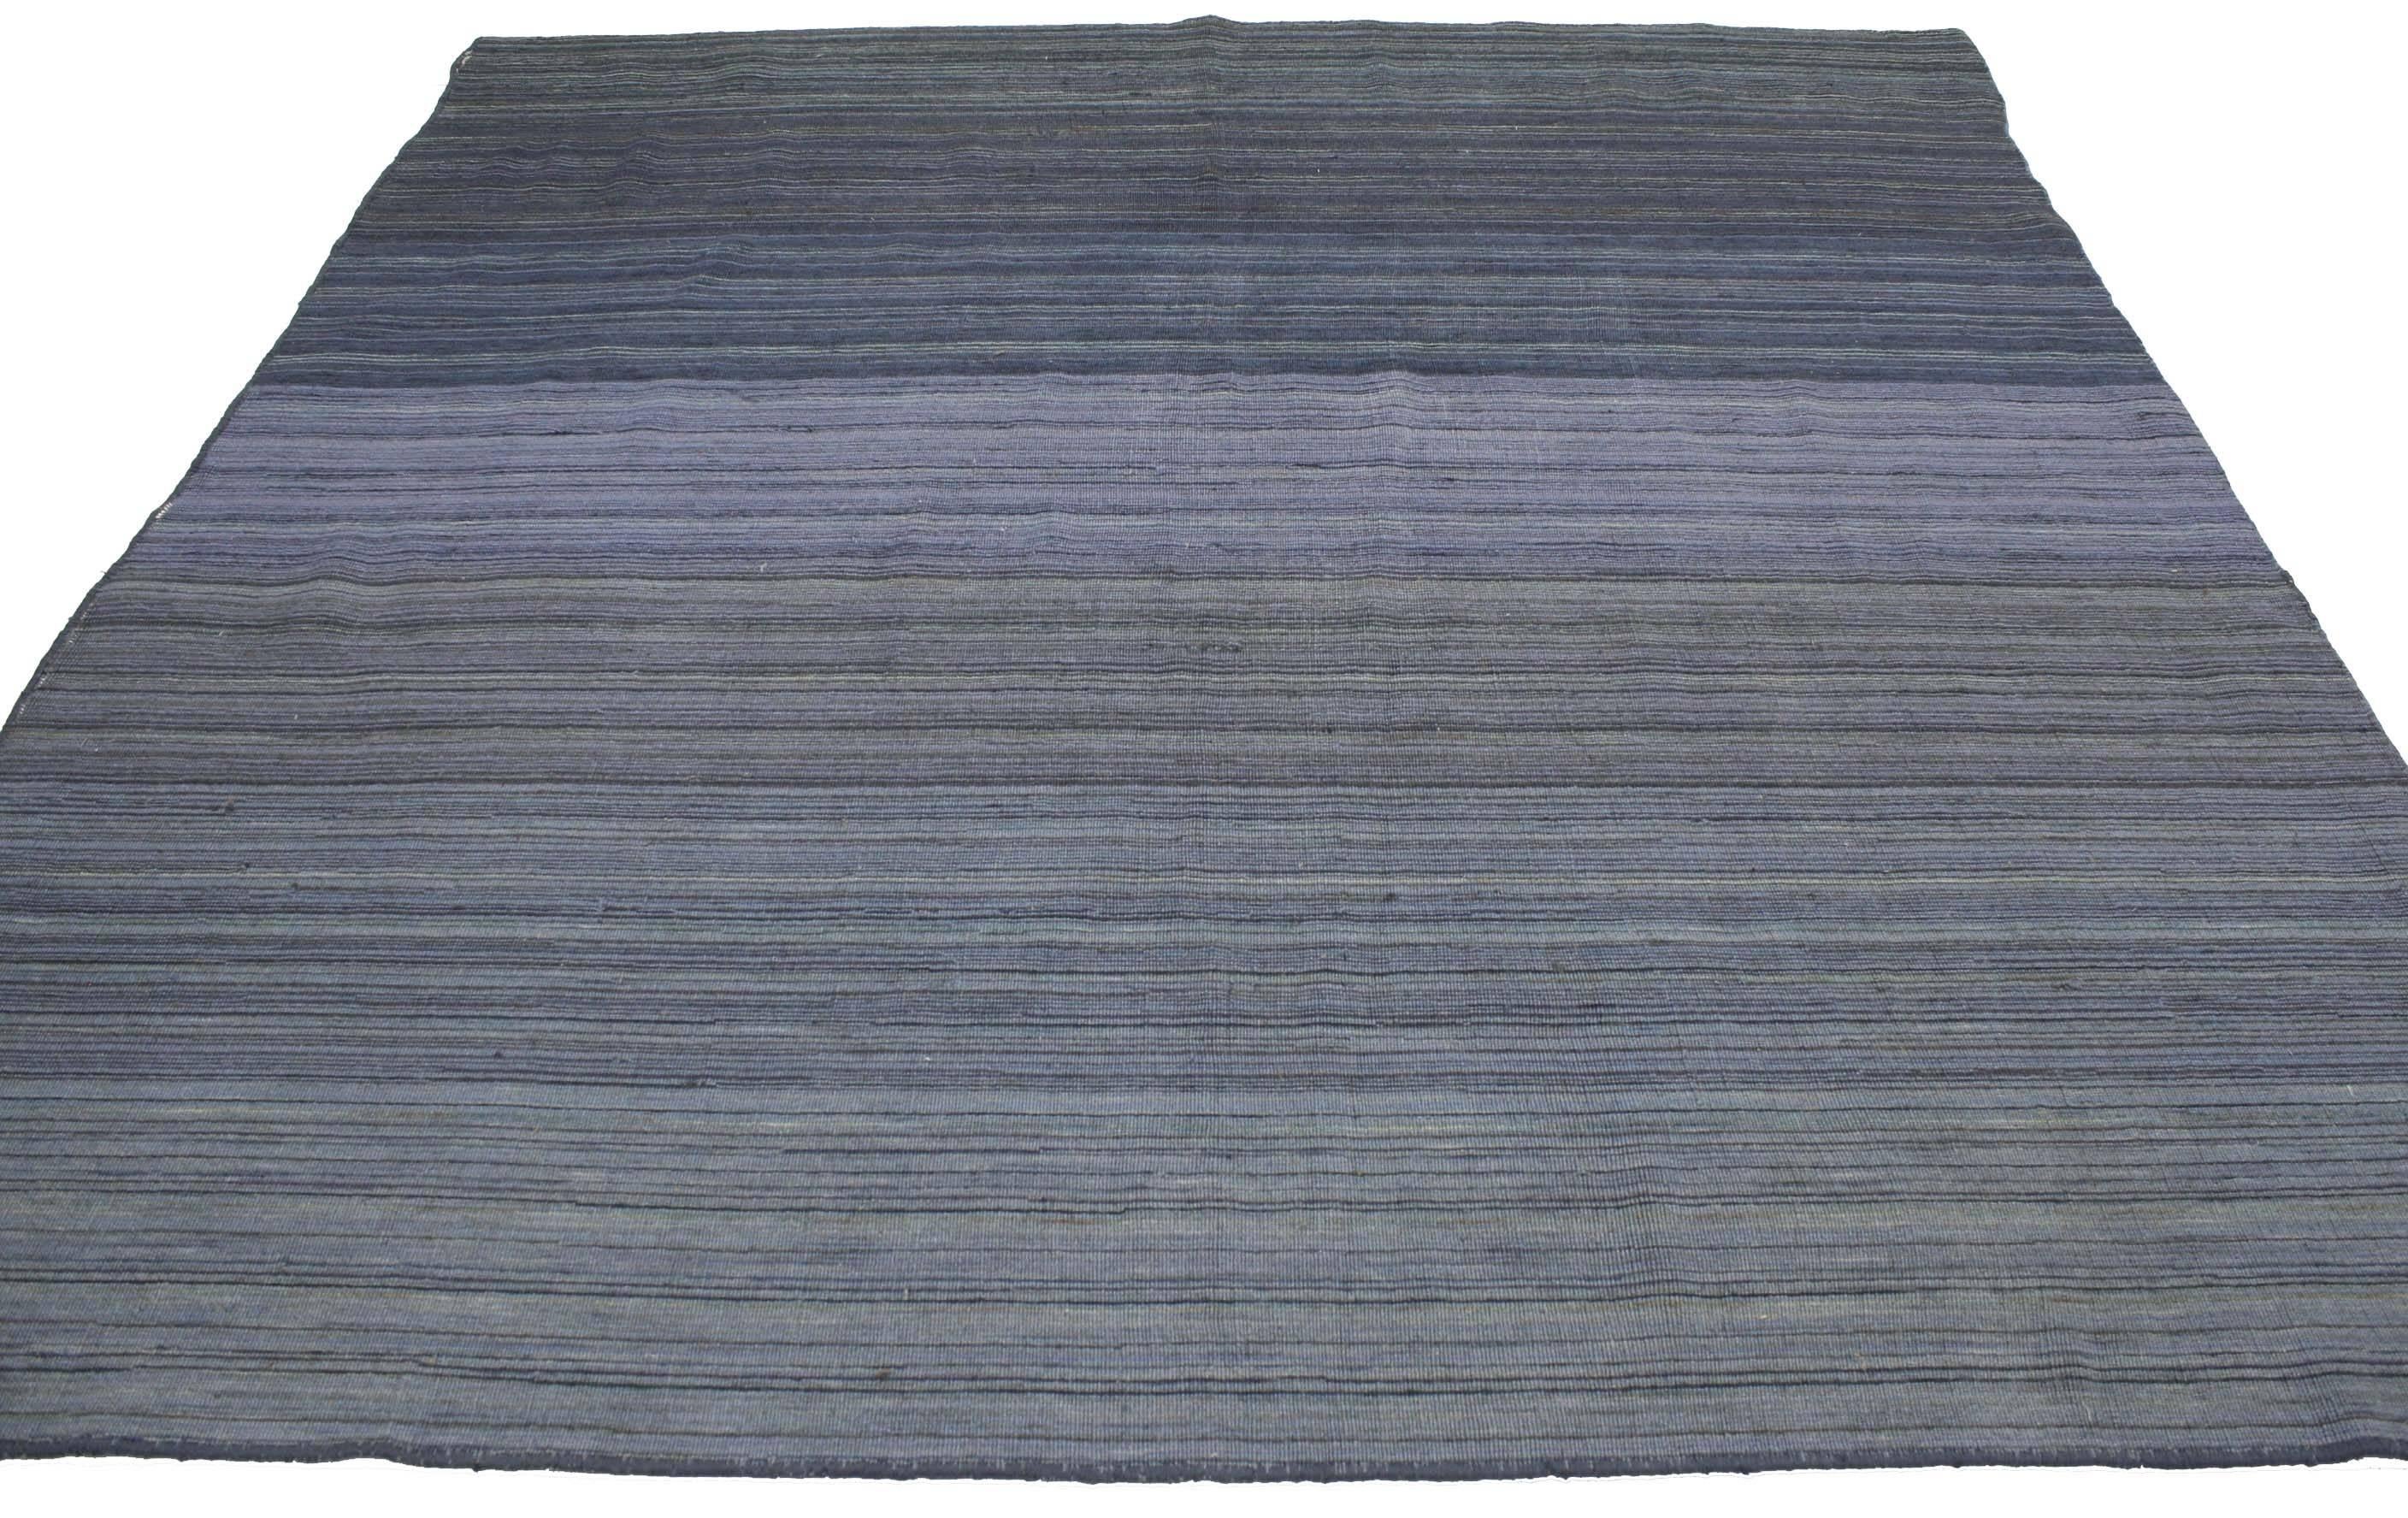 76911 Contemporary Modern Flat-Weave Rug, Ombre Kilim with Pastel Postmodern Style. Like a rippling infinity pool or an endless horizon, this contemporary modern flat-weave rug features an ombre design. Square rugs like this modern contemporary